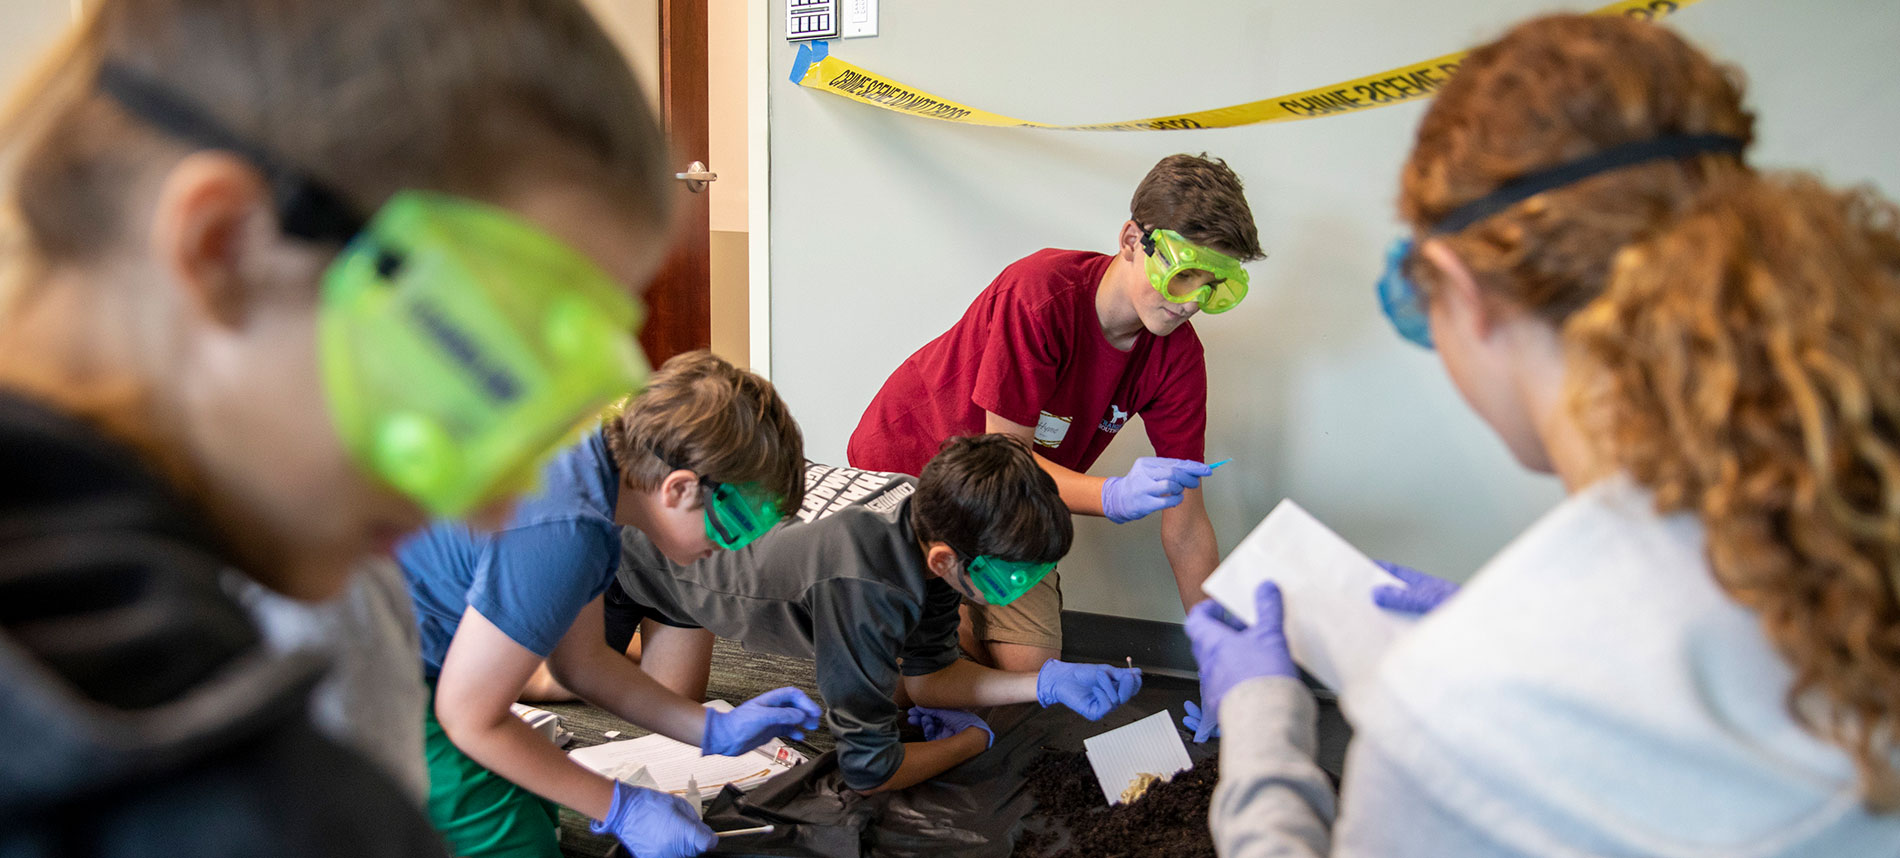 A group of high school students examines evidence during the ORAU Forensic Chemistry Mini-Academy